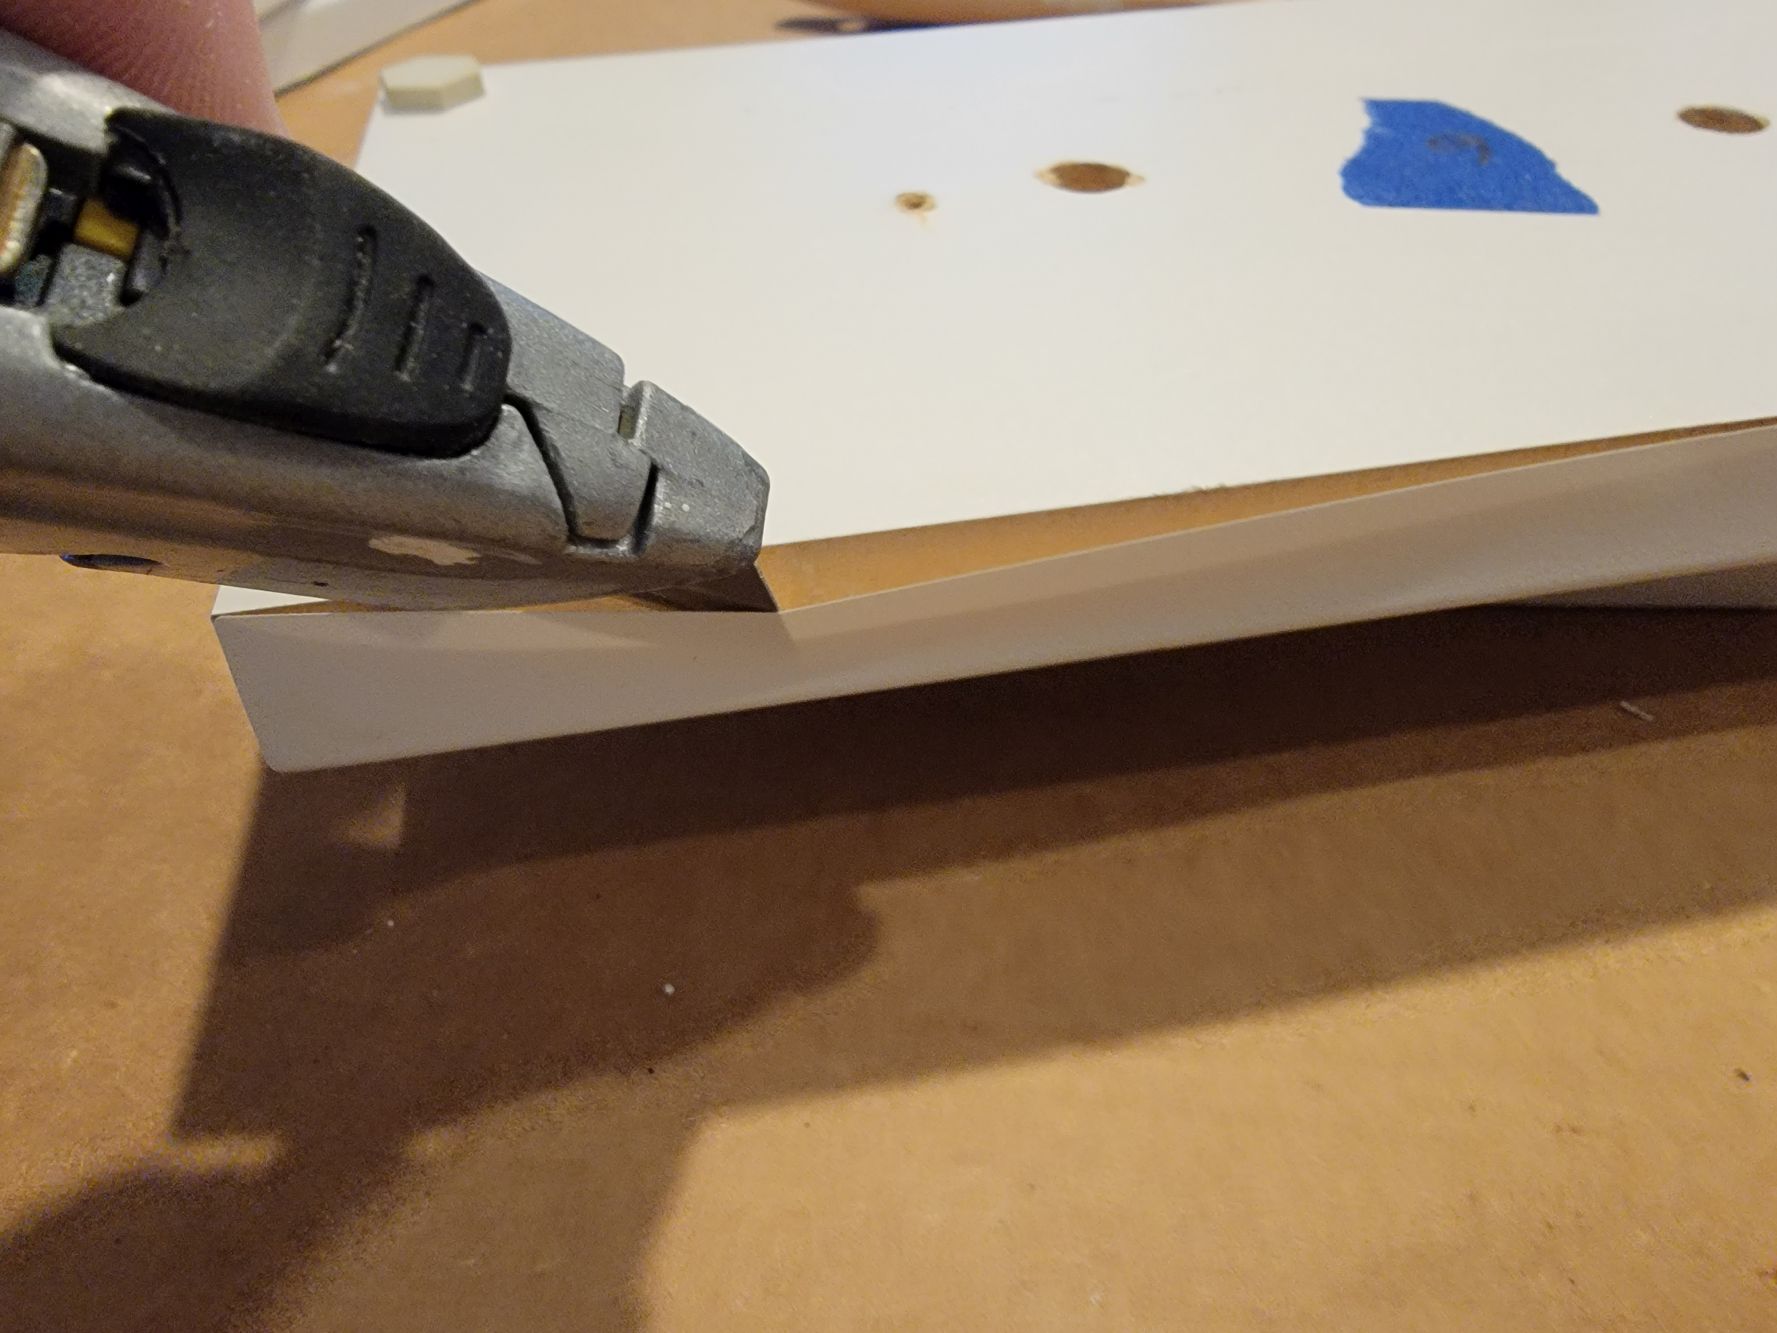 How to Paint Laminate Cabinets - Use a Utility Knife to Separate the Plastic From The Door Then Twist